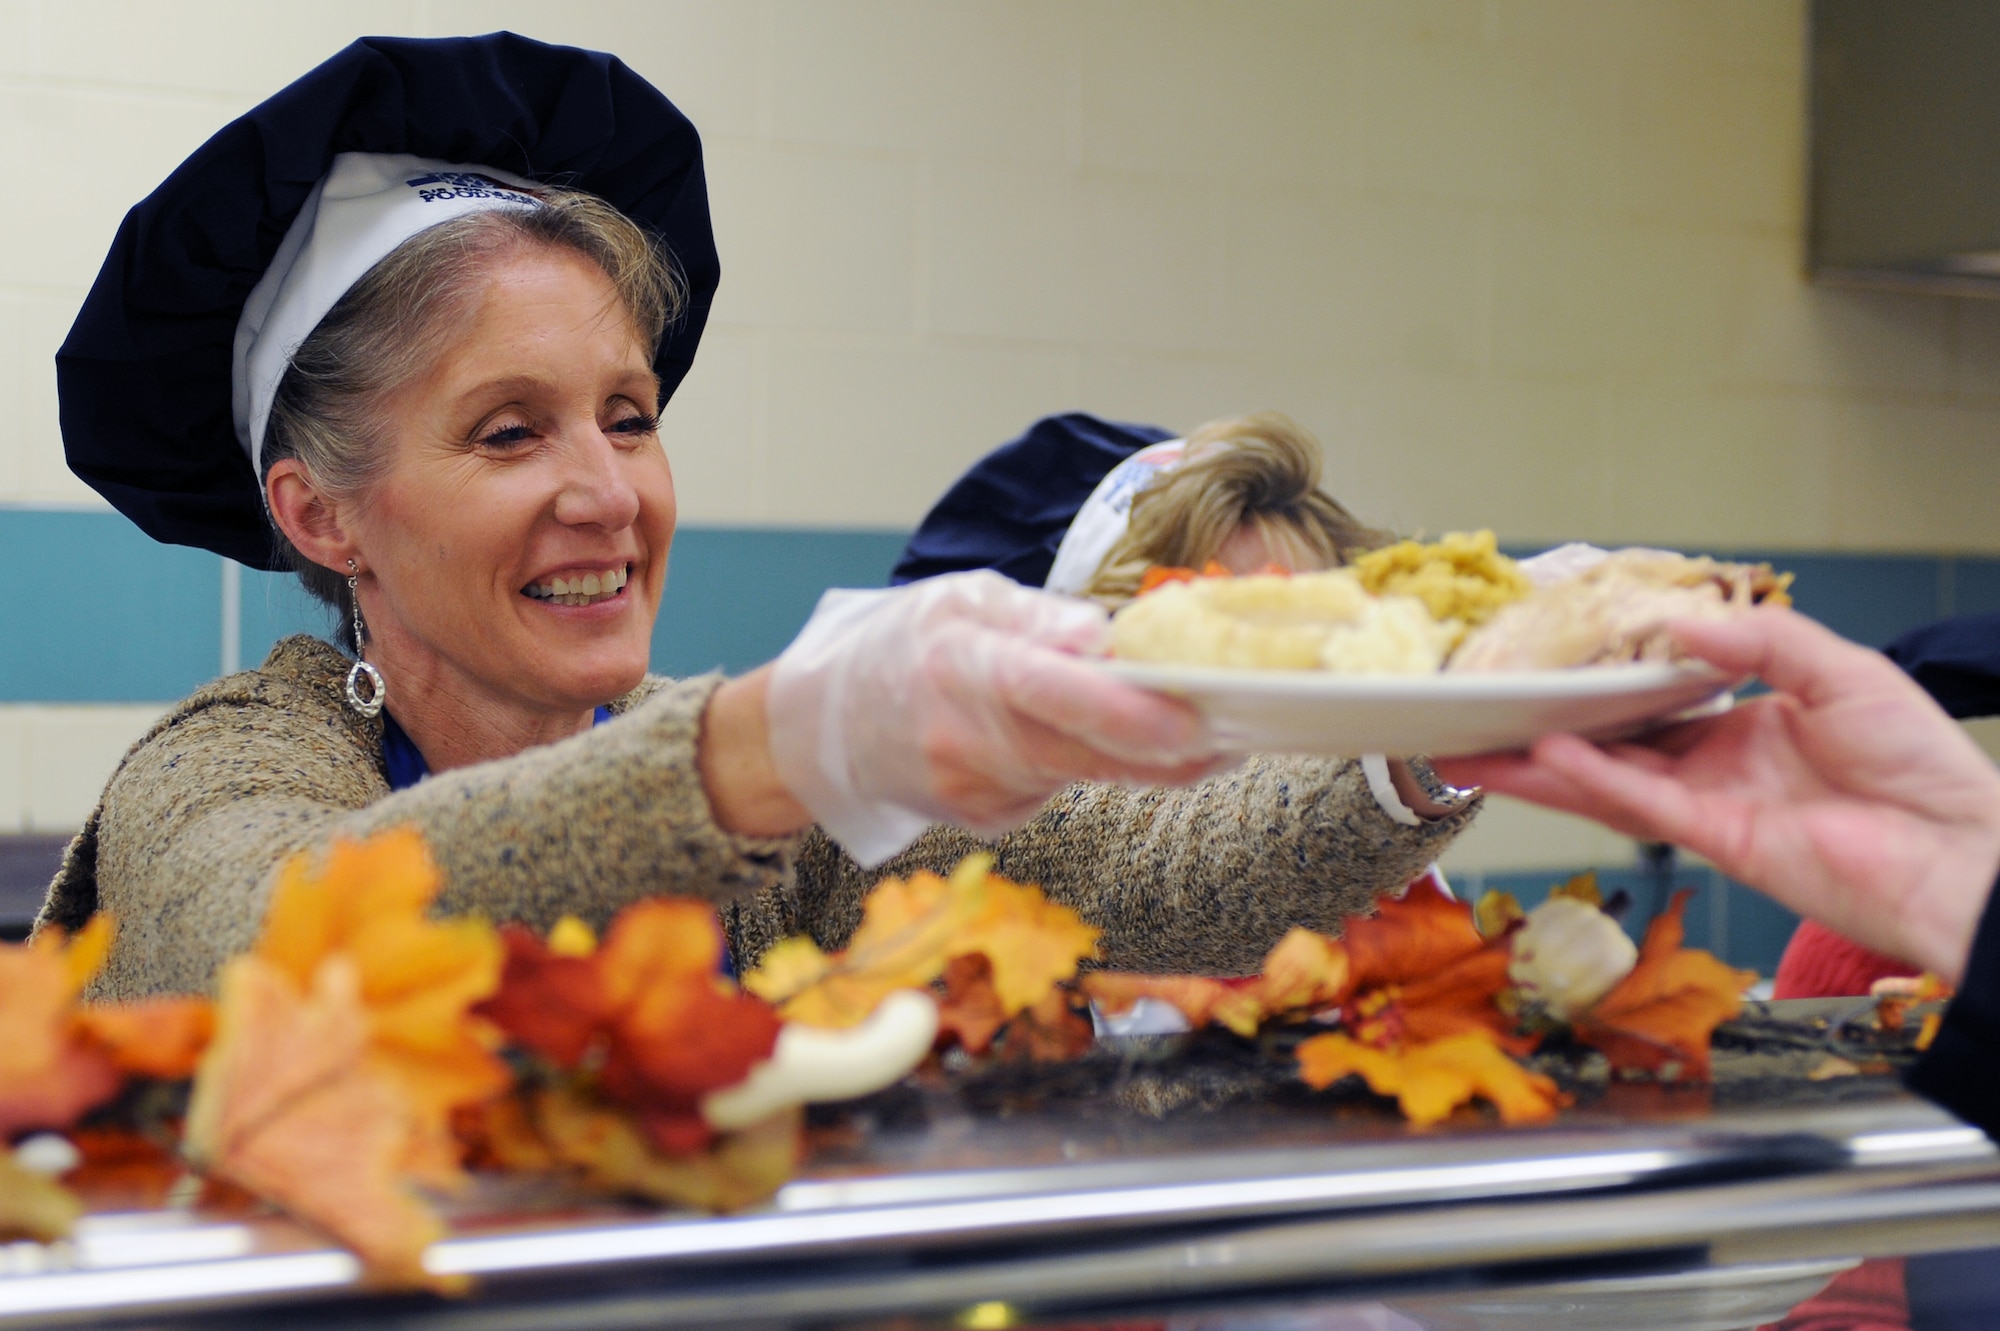 U.S. Air Force Col. Jeannie Leavitt, 4th Fighter Wing commander, passes a meal to a member of Team Seymour at the Southern Eagle Dining Facility on Seymour Johnson Air Force Base, N.C., Nov. 22, 2012. Leavitt, along with several group commanders, squadron commanders and chiefs served Thanksgiving meals to the base community. (U.S. Air Force photo/Airman 1st Class John Nieves Camacho/Released)